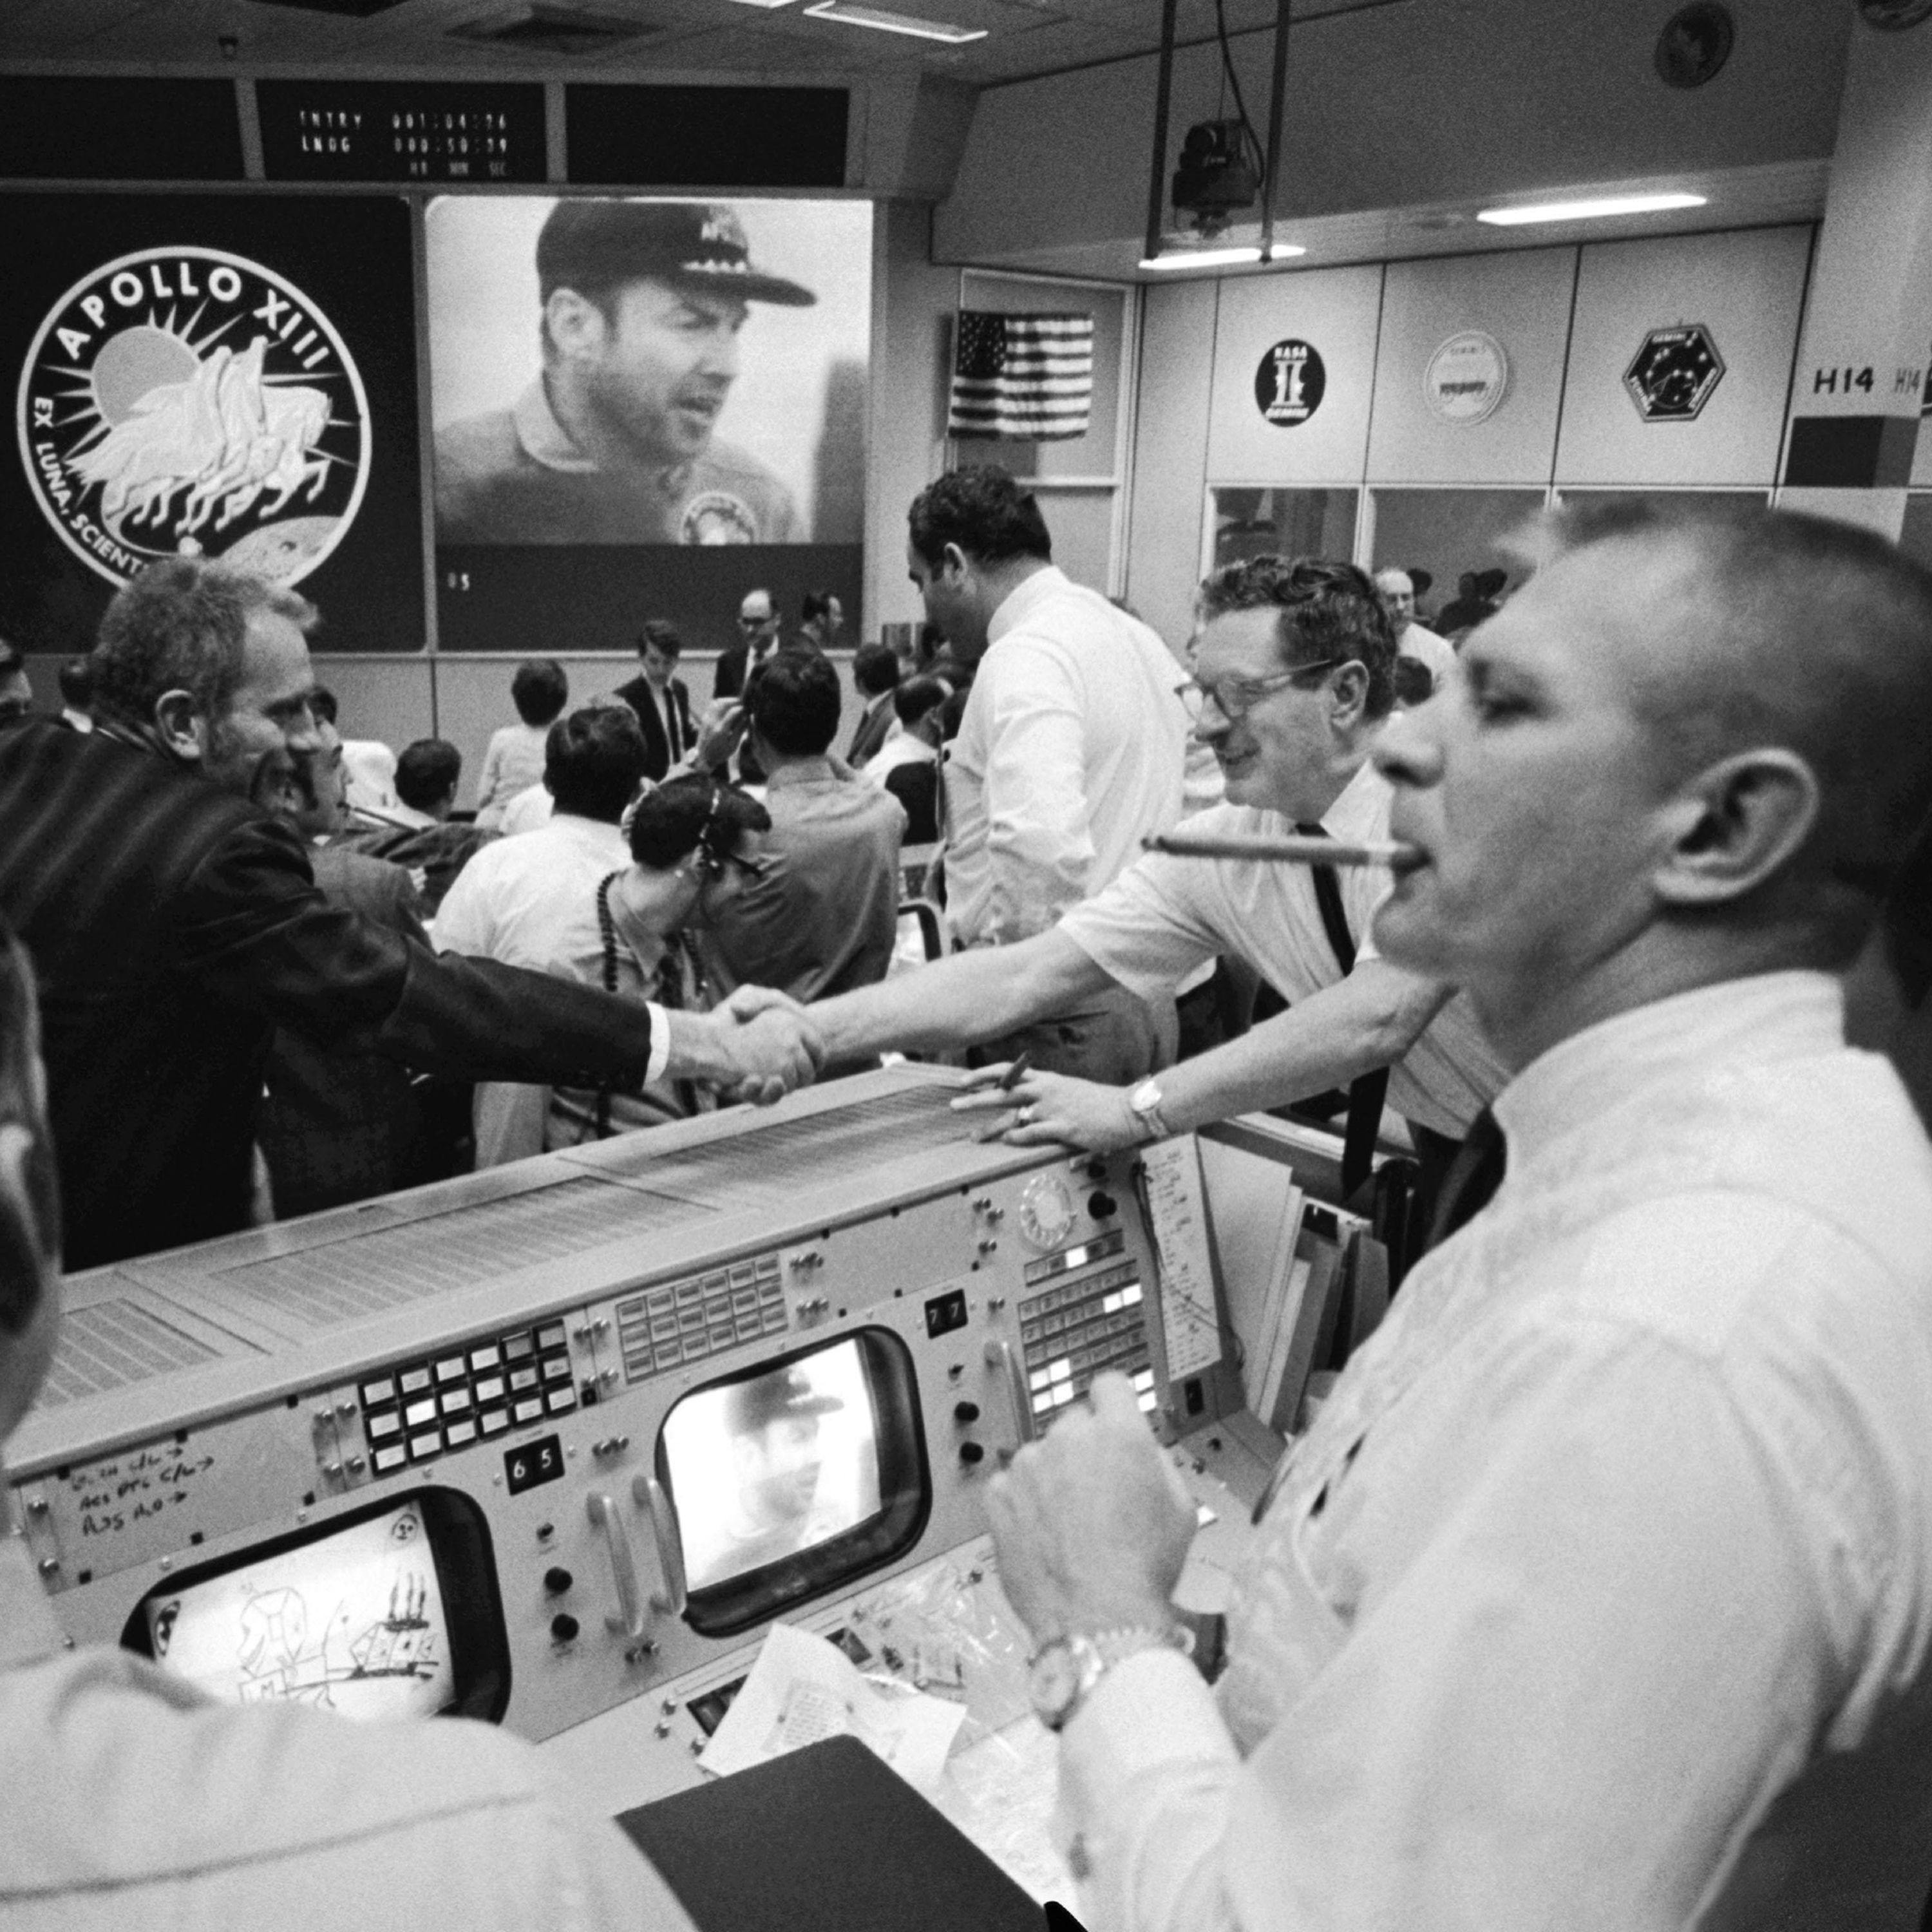 Apollo 13 special: how astronauts and Mission Control averted disaster